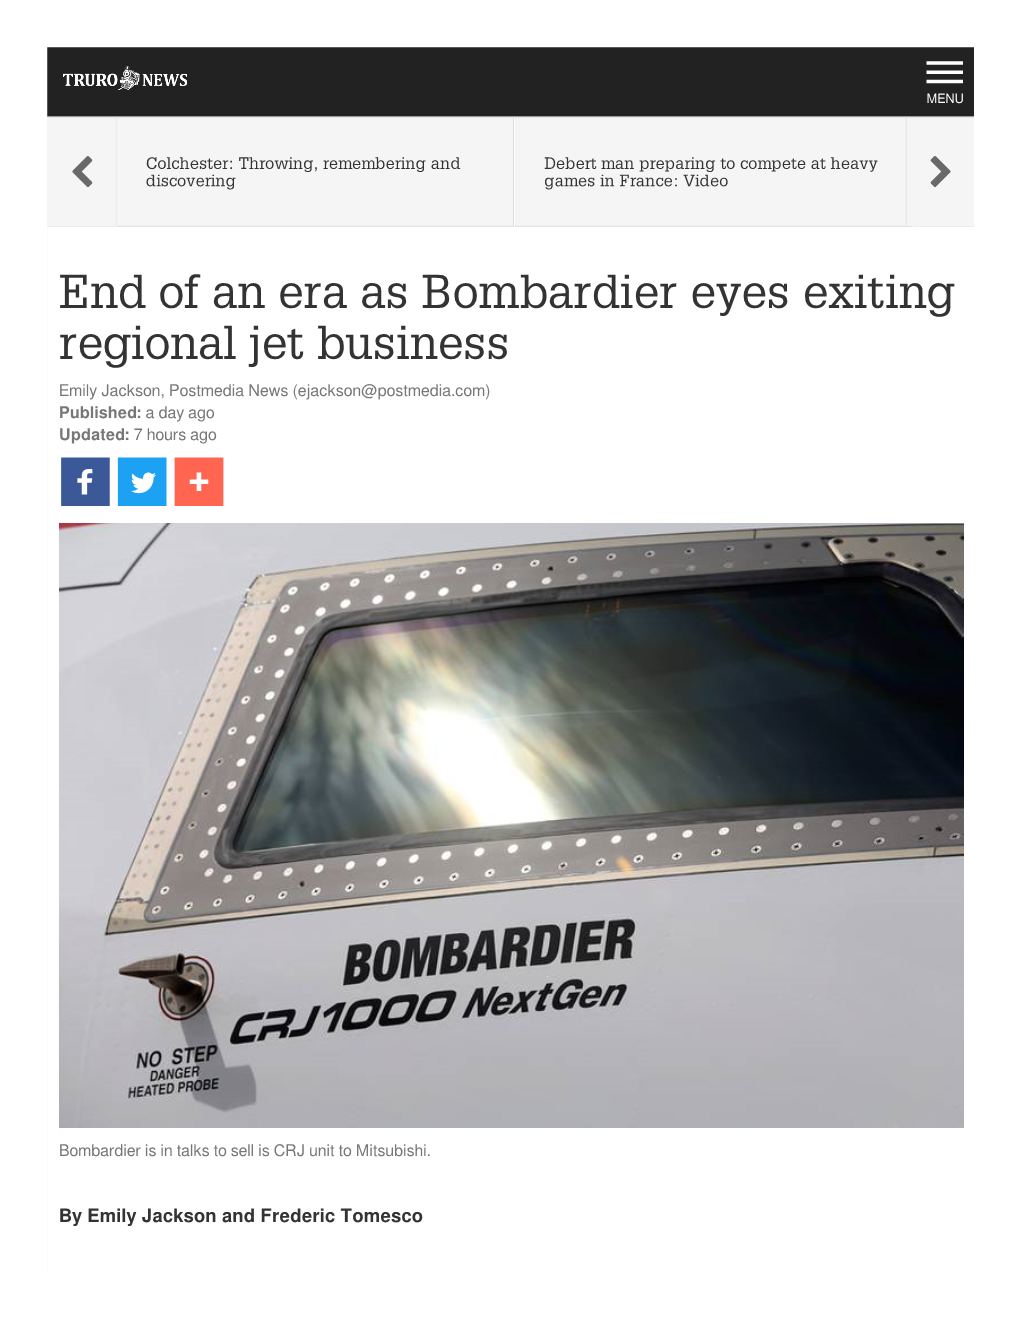 End of an Era As Bombardier Eyes Exiting Regional Jet Business Emily Jackson, Postmedia News (Ejackson@Postmedia.Com) Published: a Day Ago Updated: 7 Hours Ago